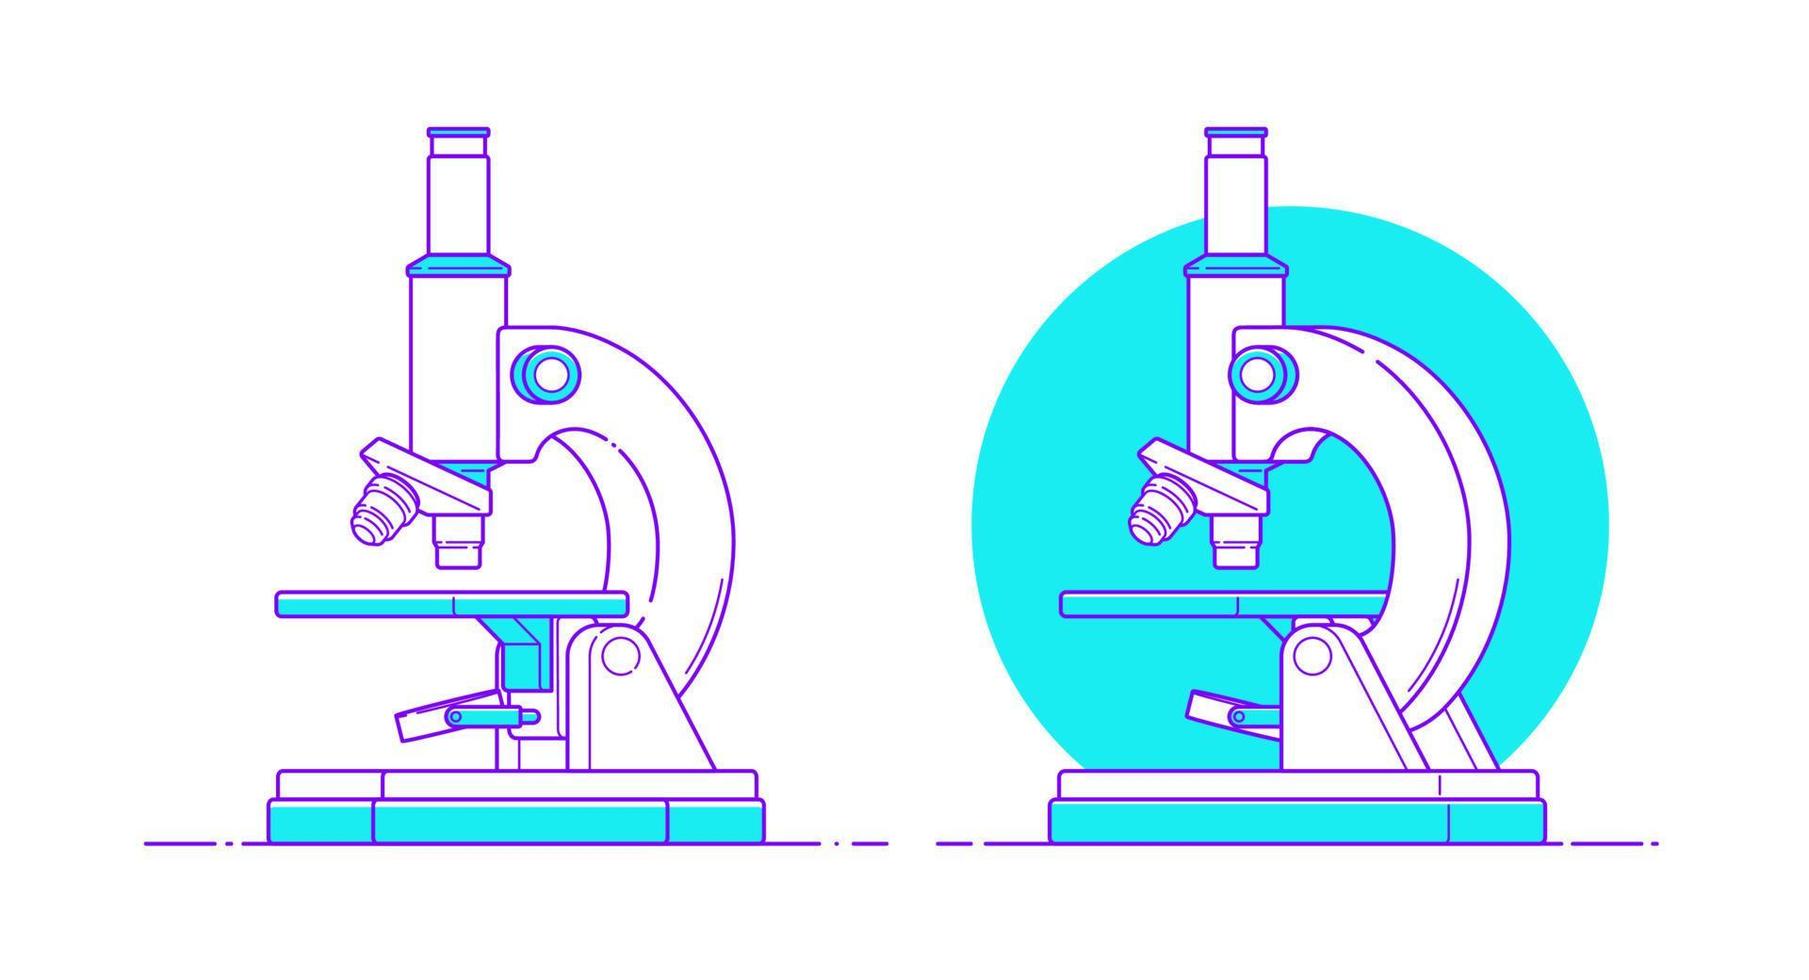 Microscope icon in flat style on isolated background. Microbiology, education technology concept. Vector linear illustration with outline for medical design, logo. Chemical laboratory research